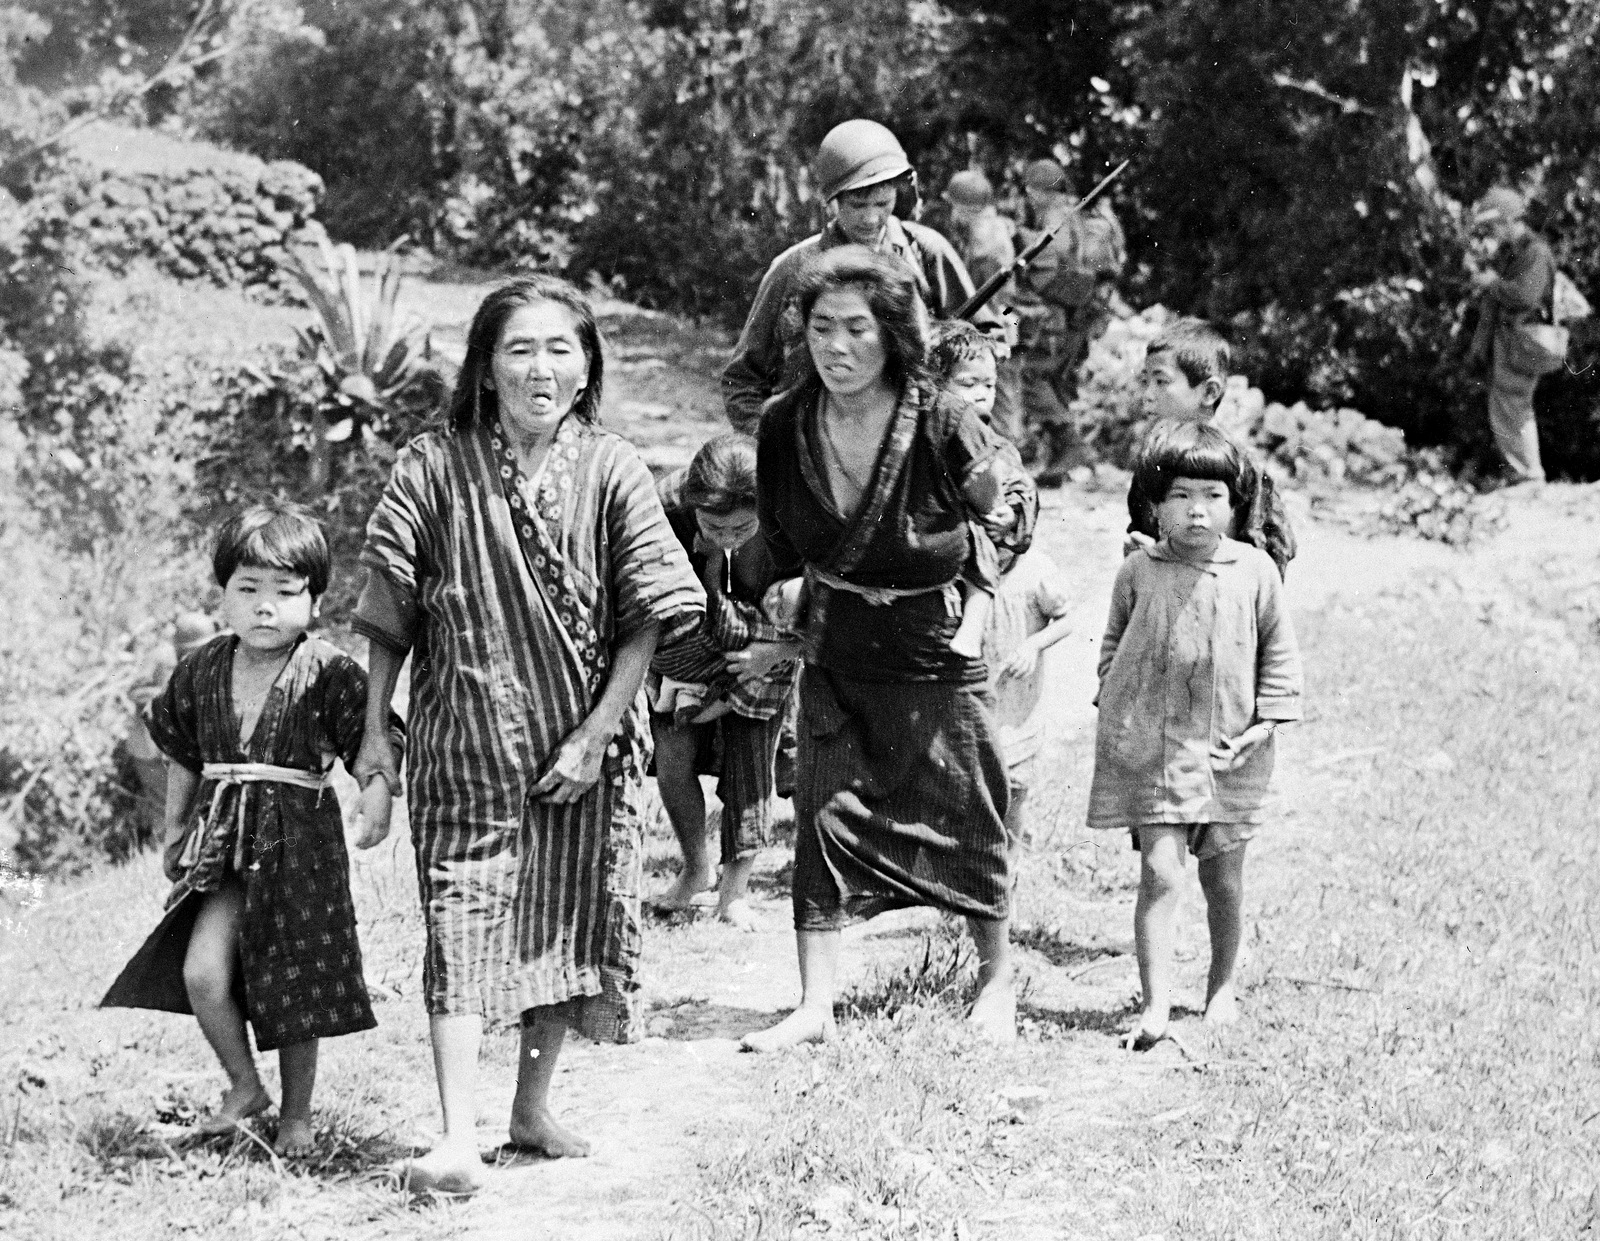 Japanese women and children are moved down a road in Okinawa shortly after American forces invaded Ryukyu island, April 6, 1945. (AP Photo)